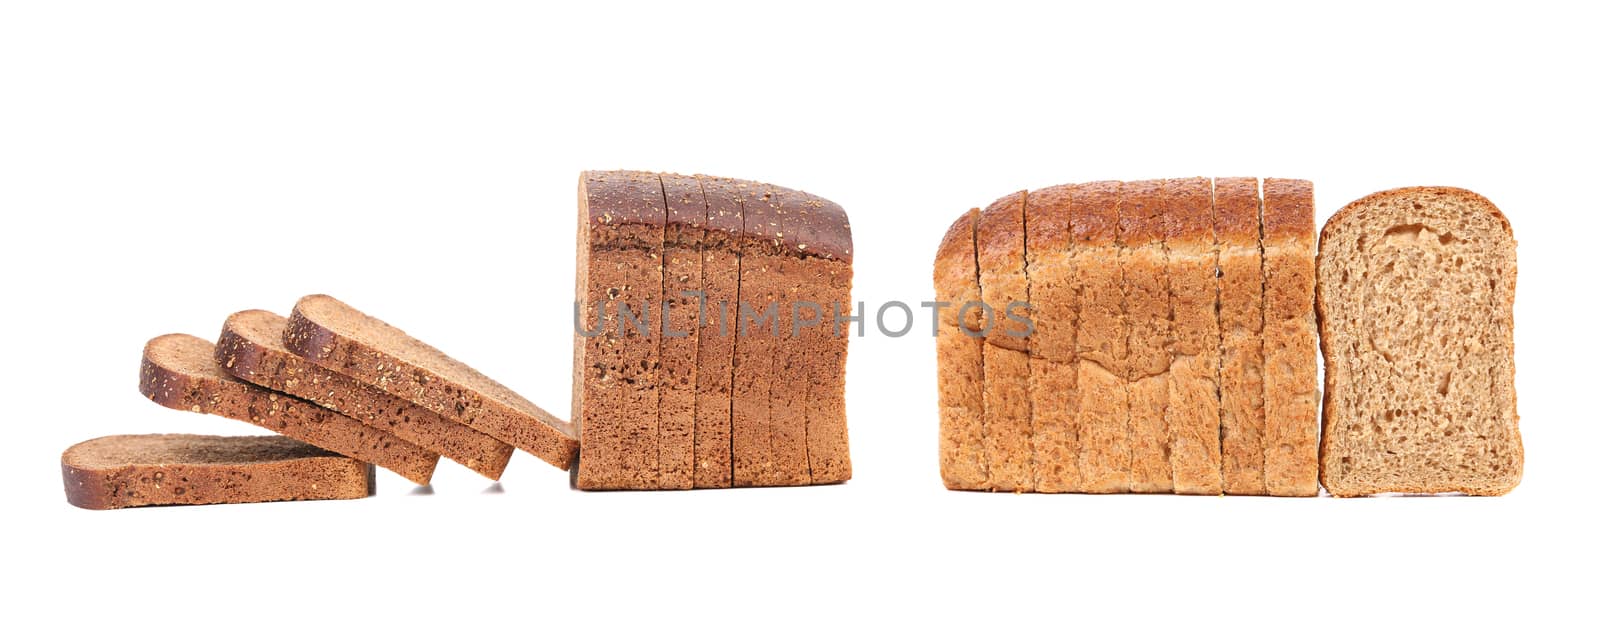 Compozition of sliced brown bread by indigolotos